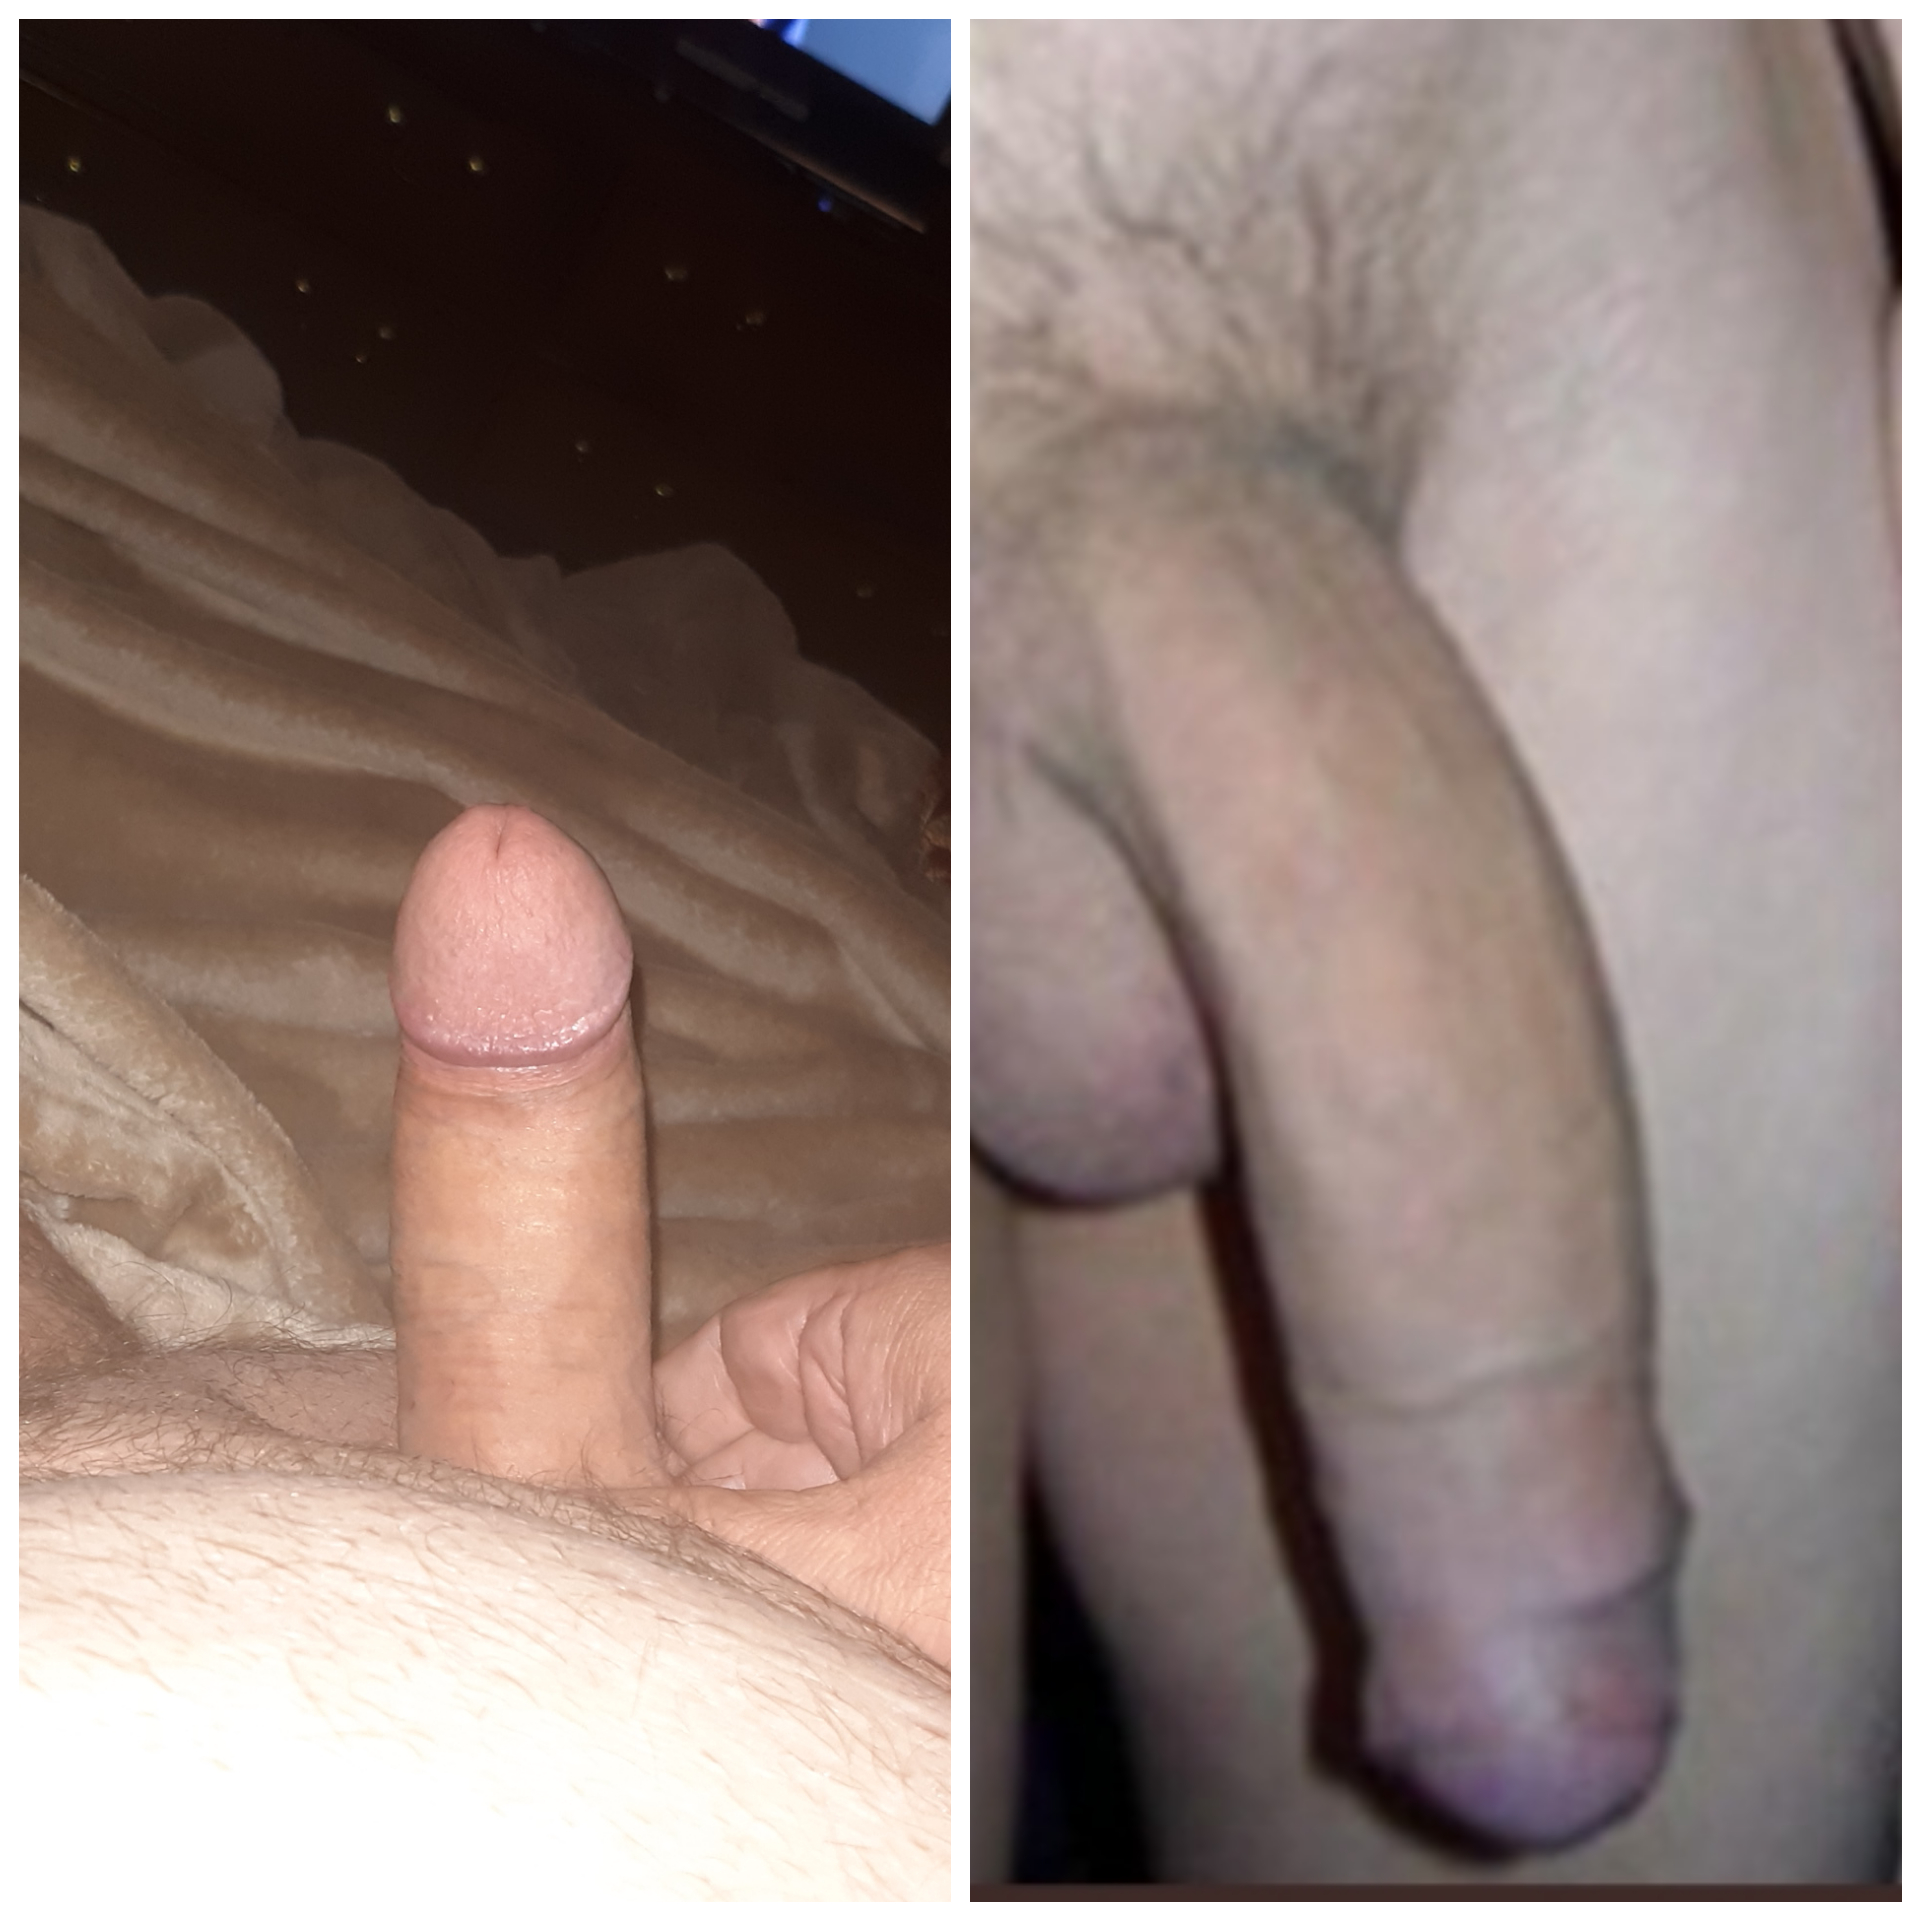 Me hard vs my wifes lover limp... pic